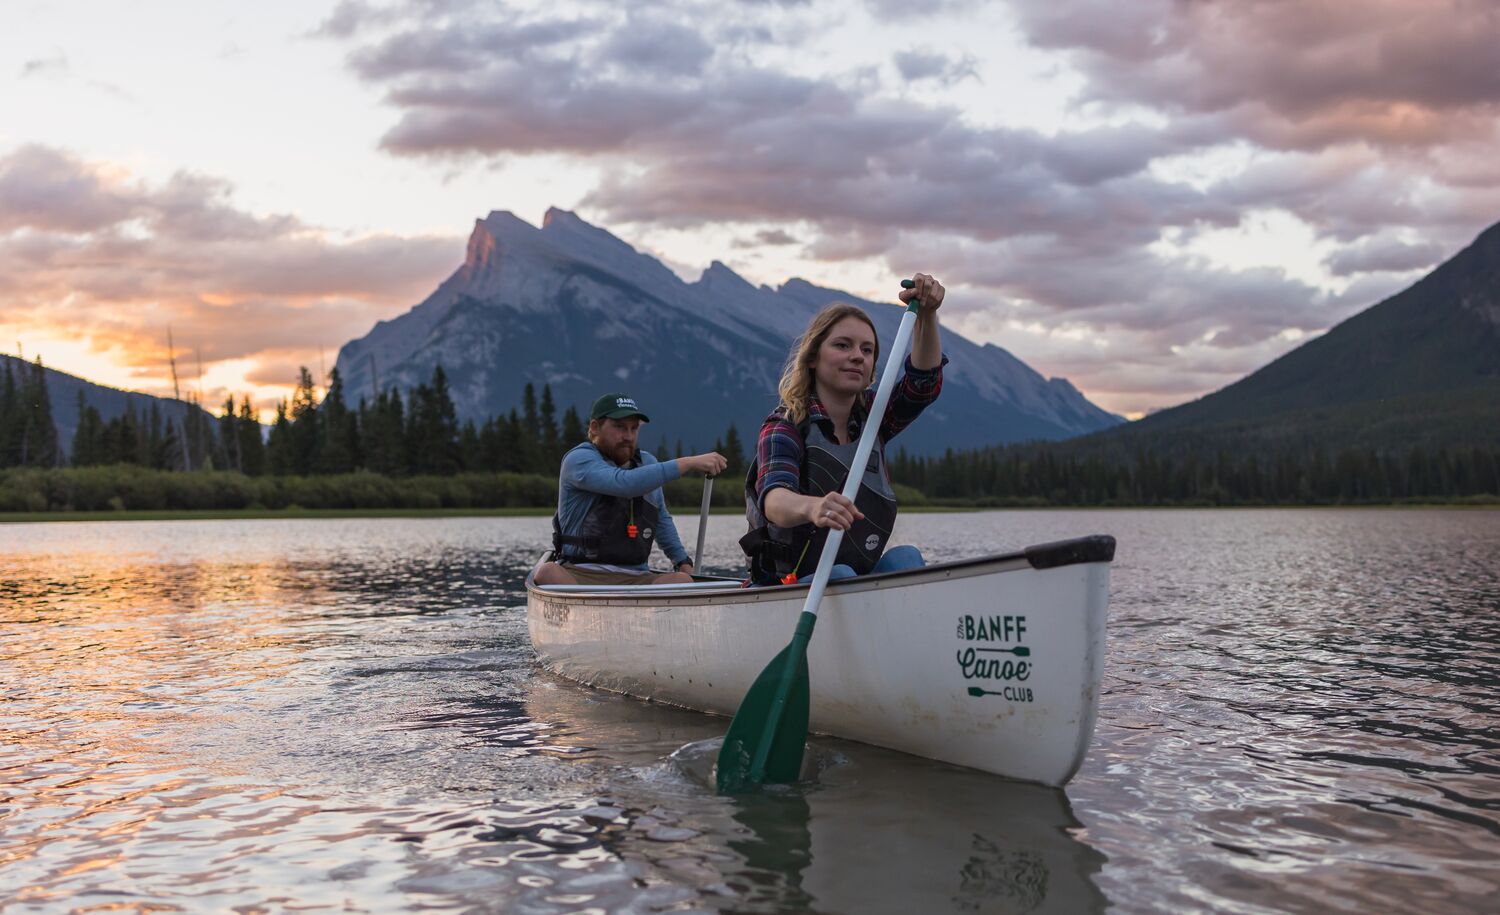 Two people canoe on Vermilion Lakes at sunrise with Mt Rundle in the background in Banff National Park.